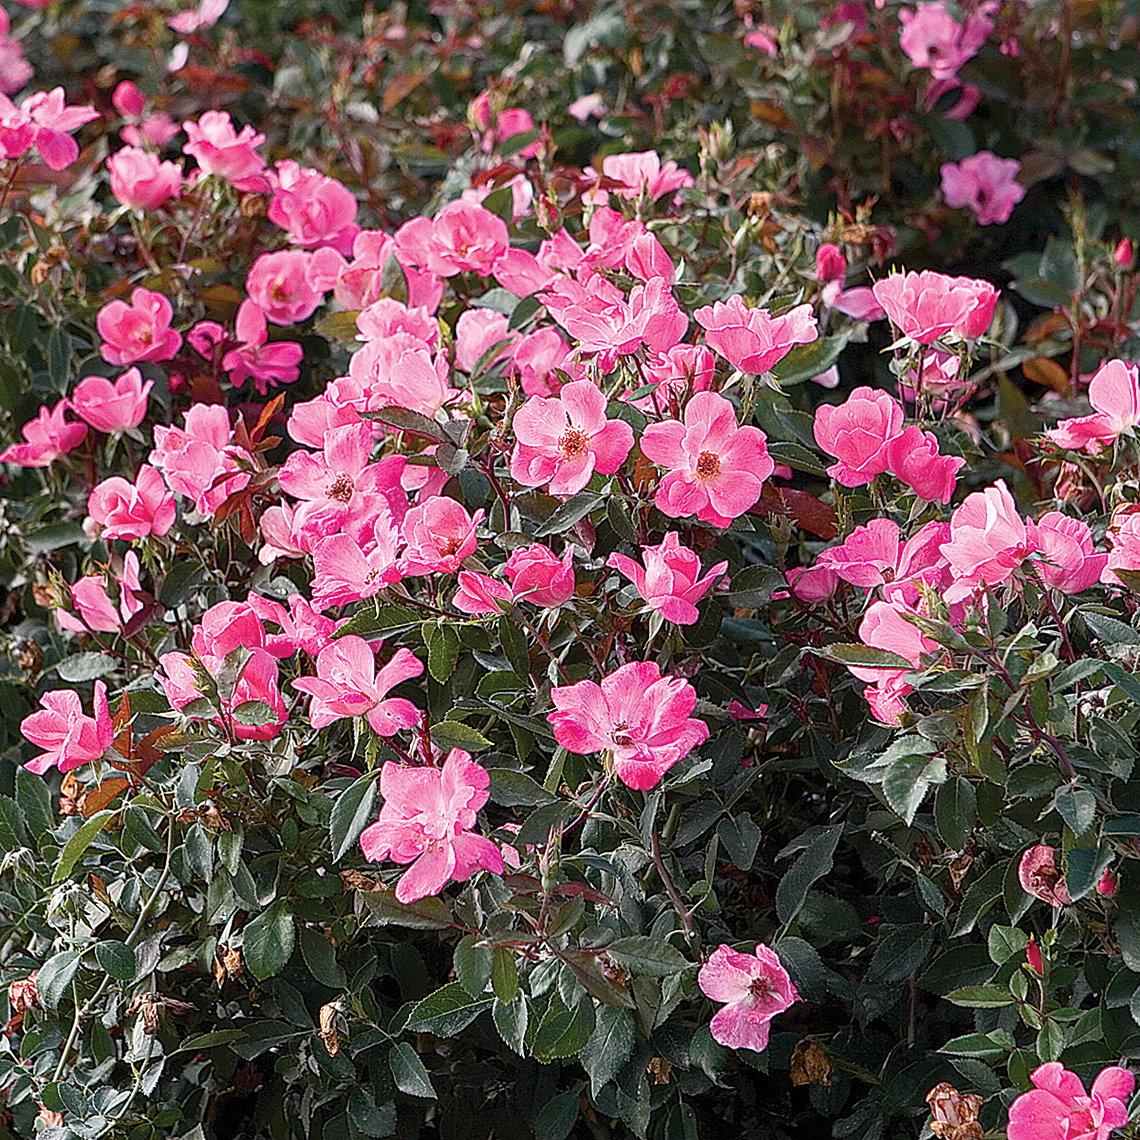 Knock Out Pink Rose heavily blooming in garden bed